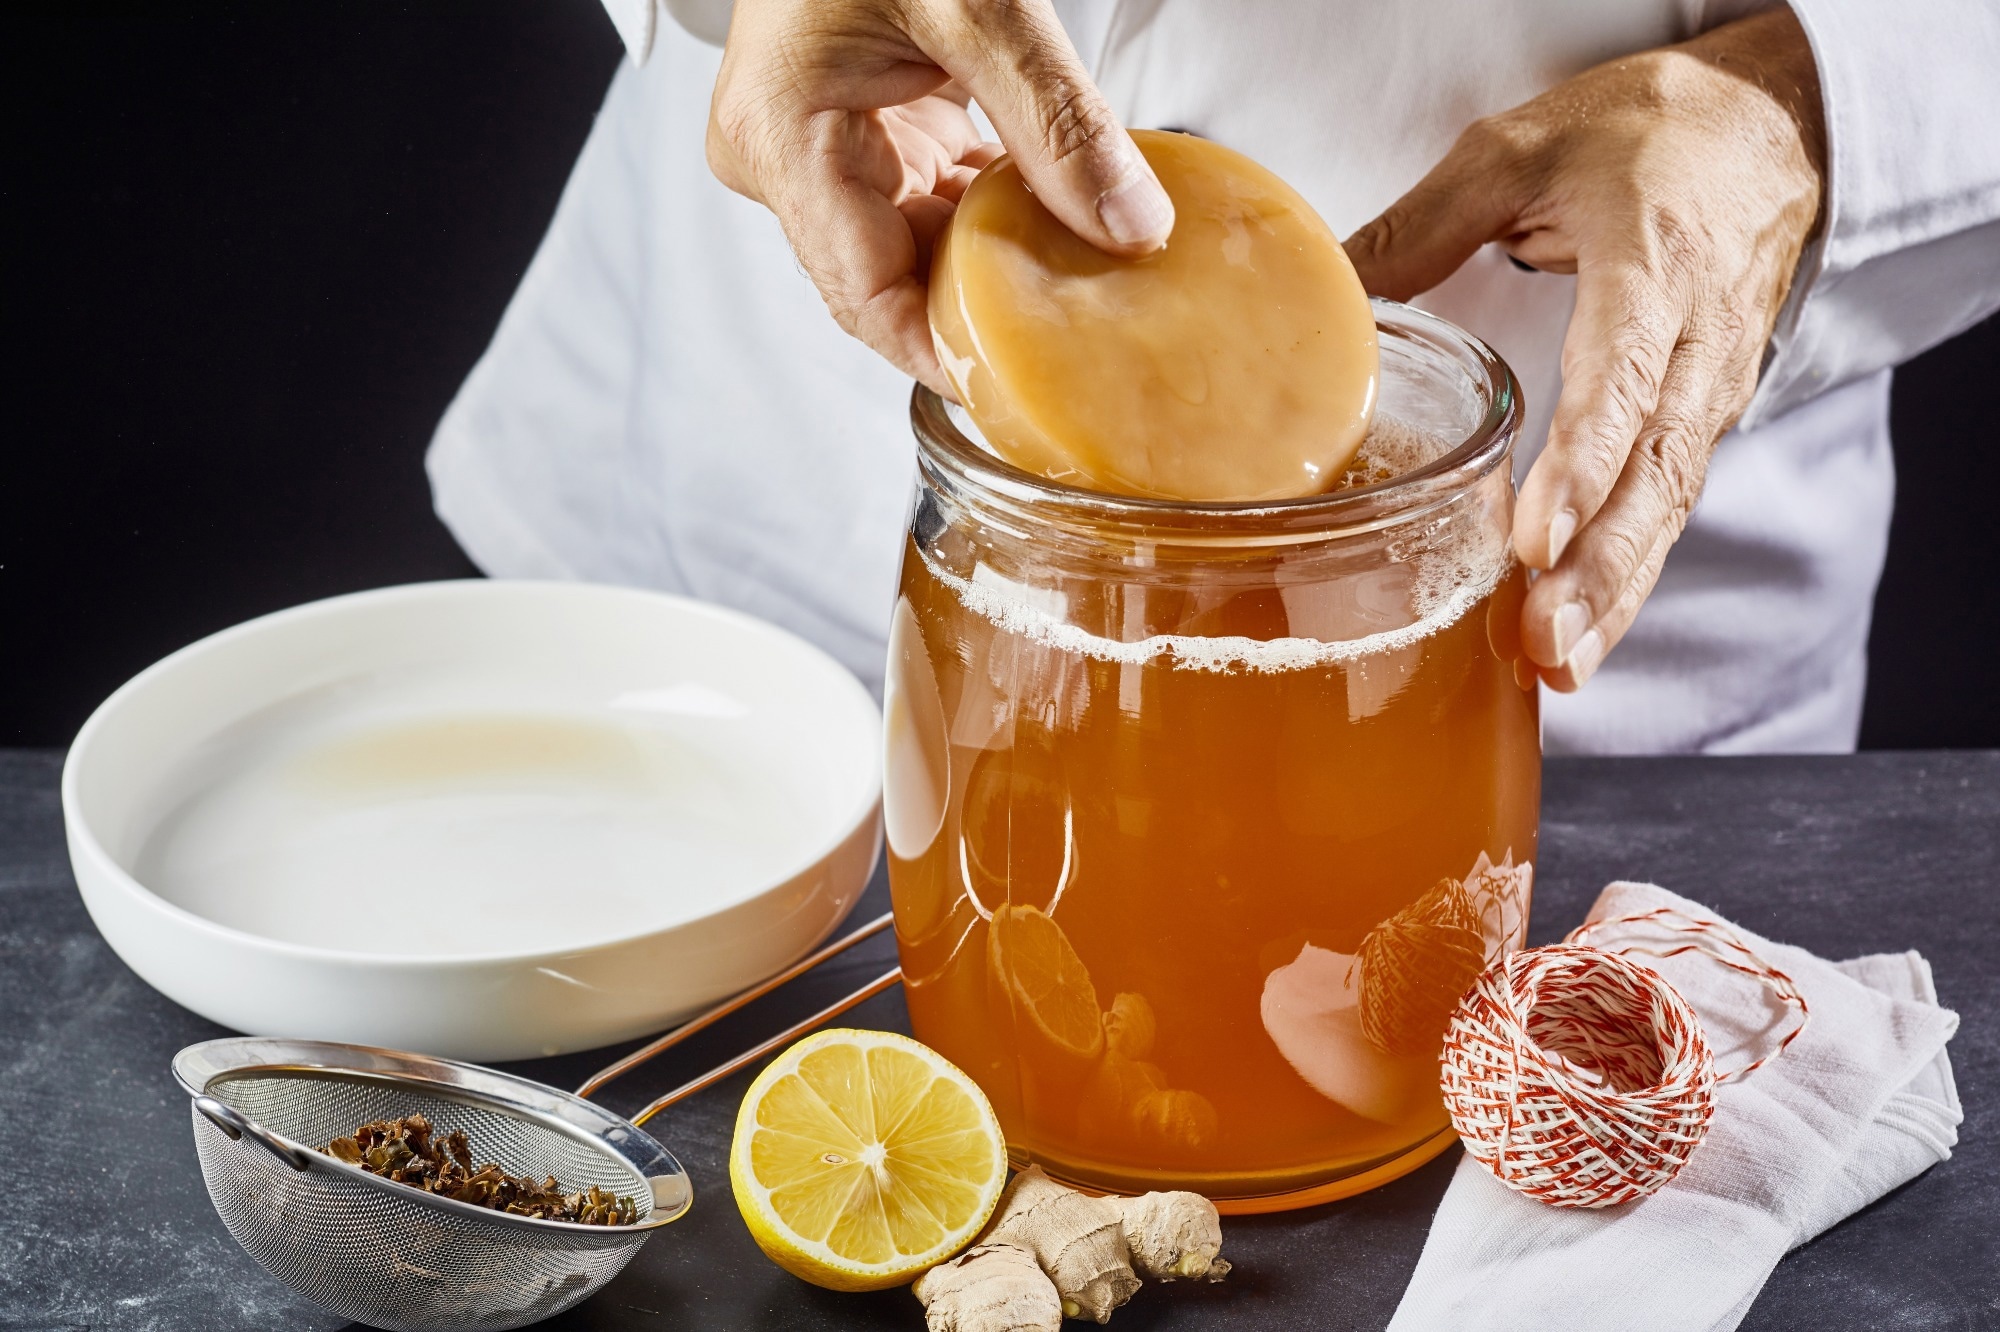 Study: Kombucha tea as an anti-hyperglycemic agent in humans with diabetes – a randomized controlled pilot investigation. Image Credit: stockcreations / Shutterstock.com